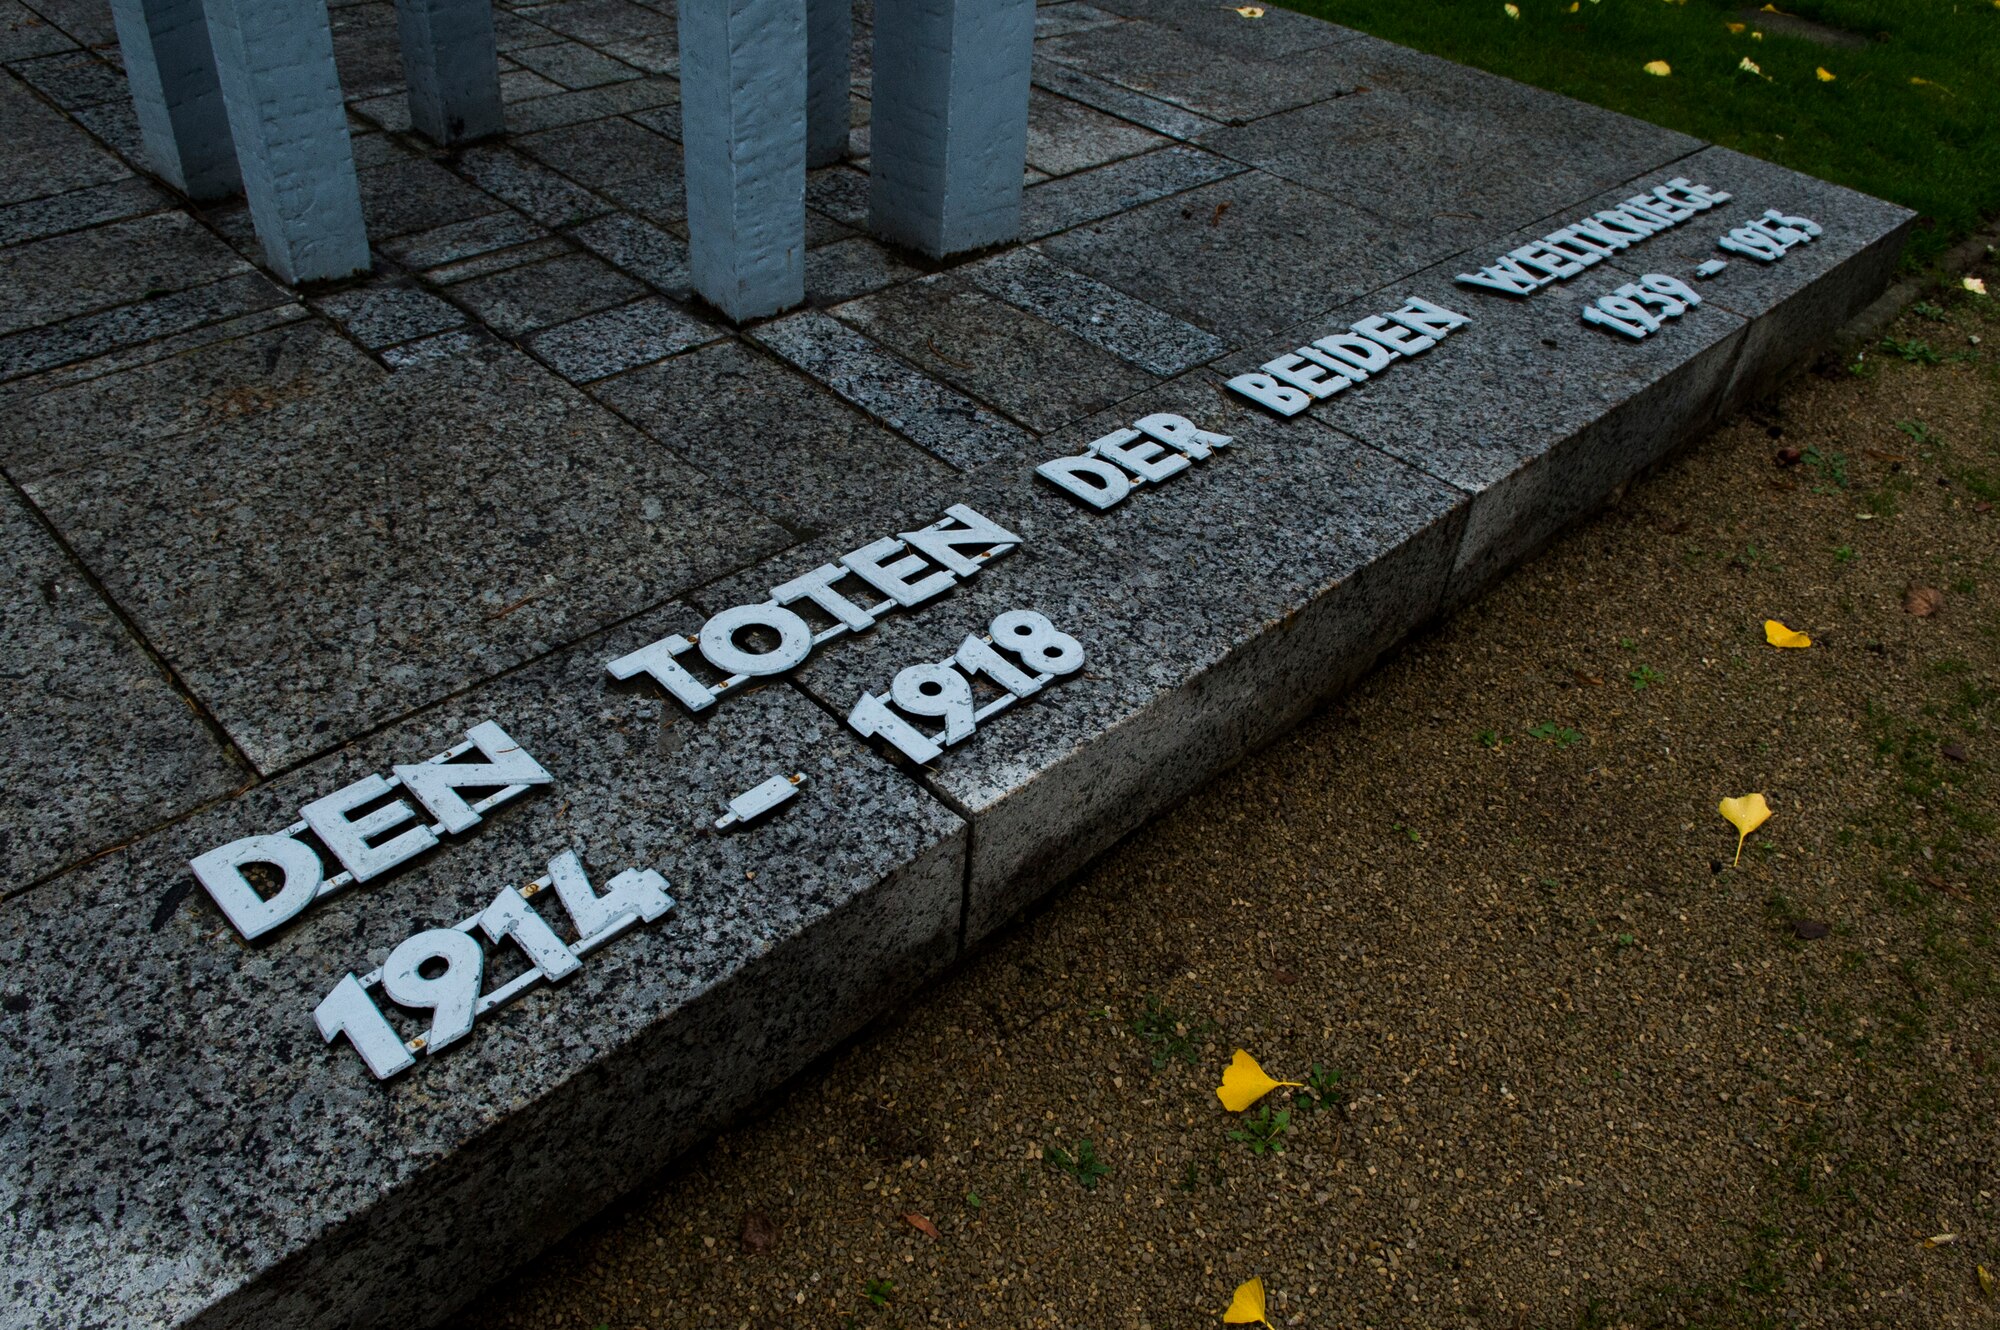 A German memorial reads, ‘The dead of the two world wars,’ at a cemetery in Trier, Germany, Nov. 15, 2015. The memorial was the location of a ceremony for Germany’s National Mourning Day. (U.S. Air Force photo by Airman 1st Class Luke Kitterman/Released)